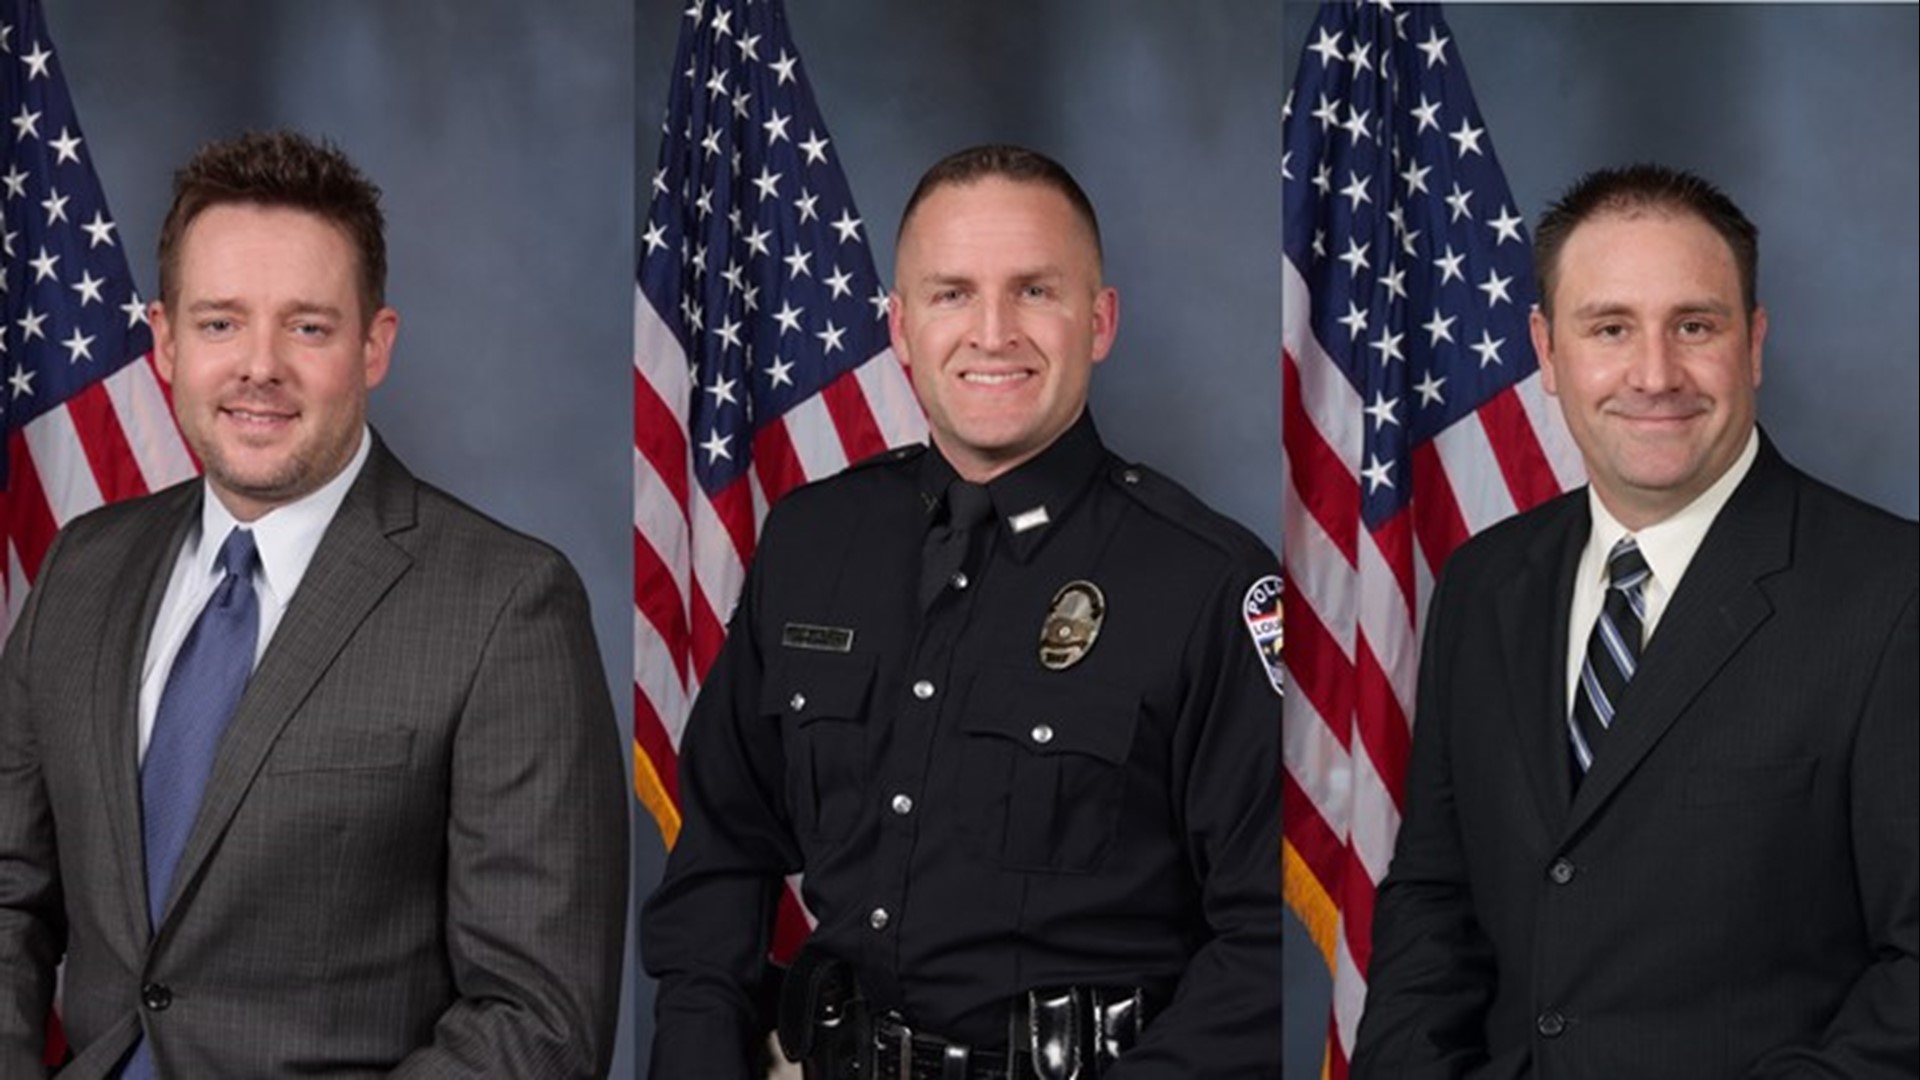 Officers Brett Hankison, Myles Cosgrove, and John Mattingly will have to handover their cell phones, body cameras, computers and tablets.